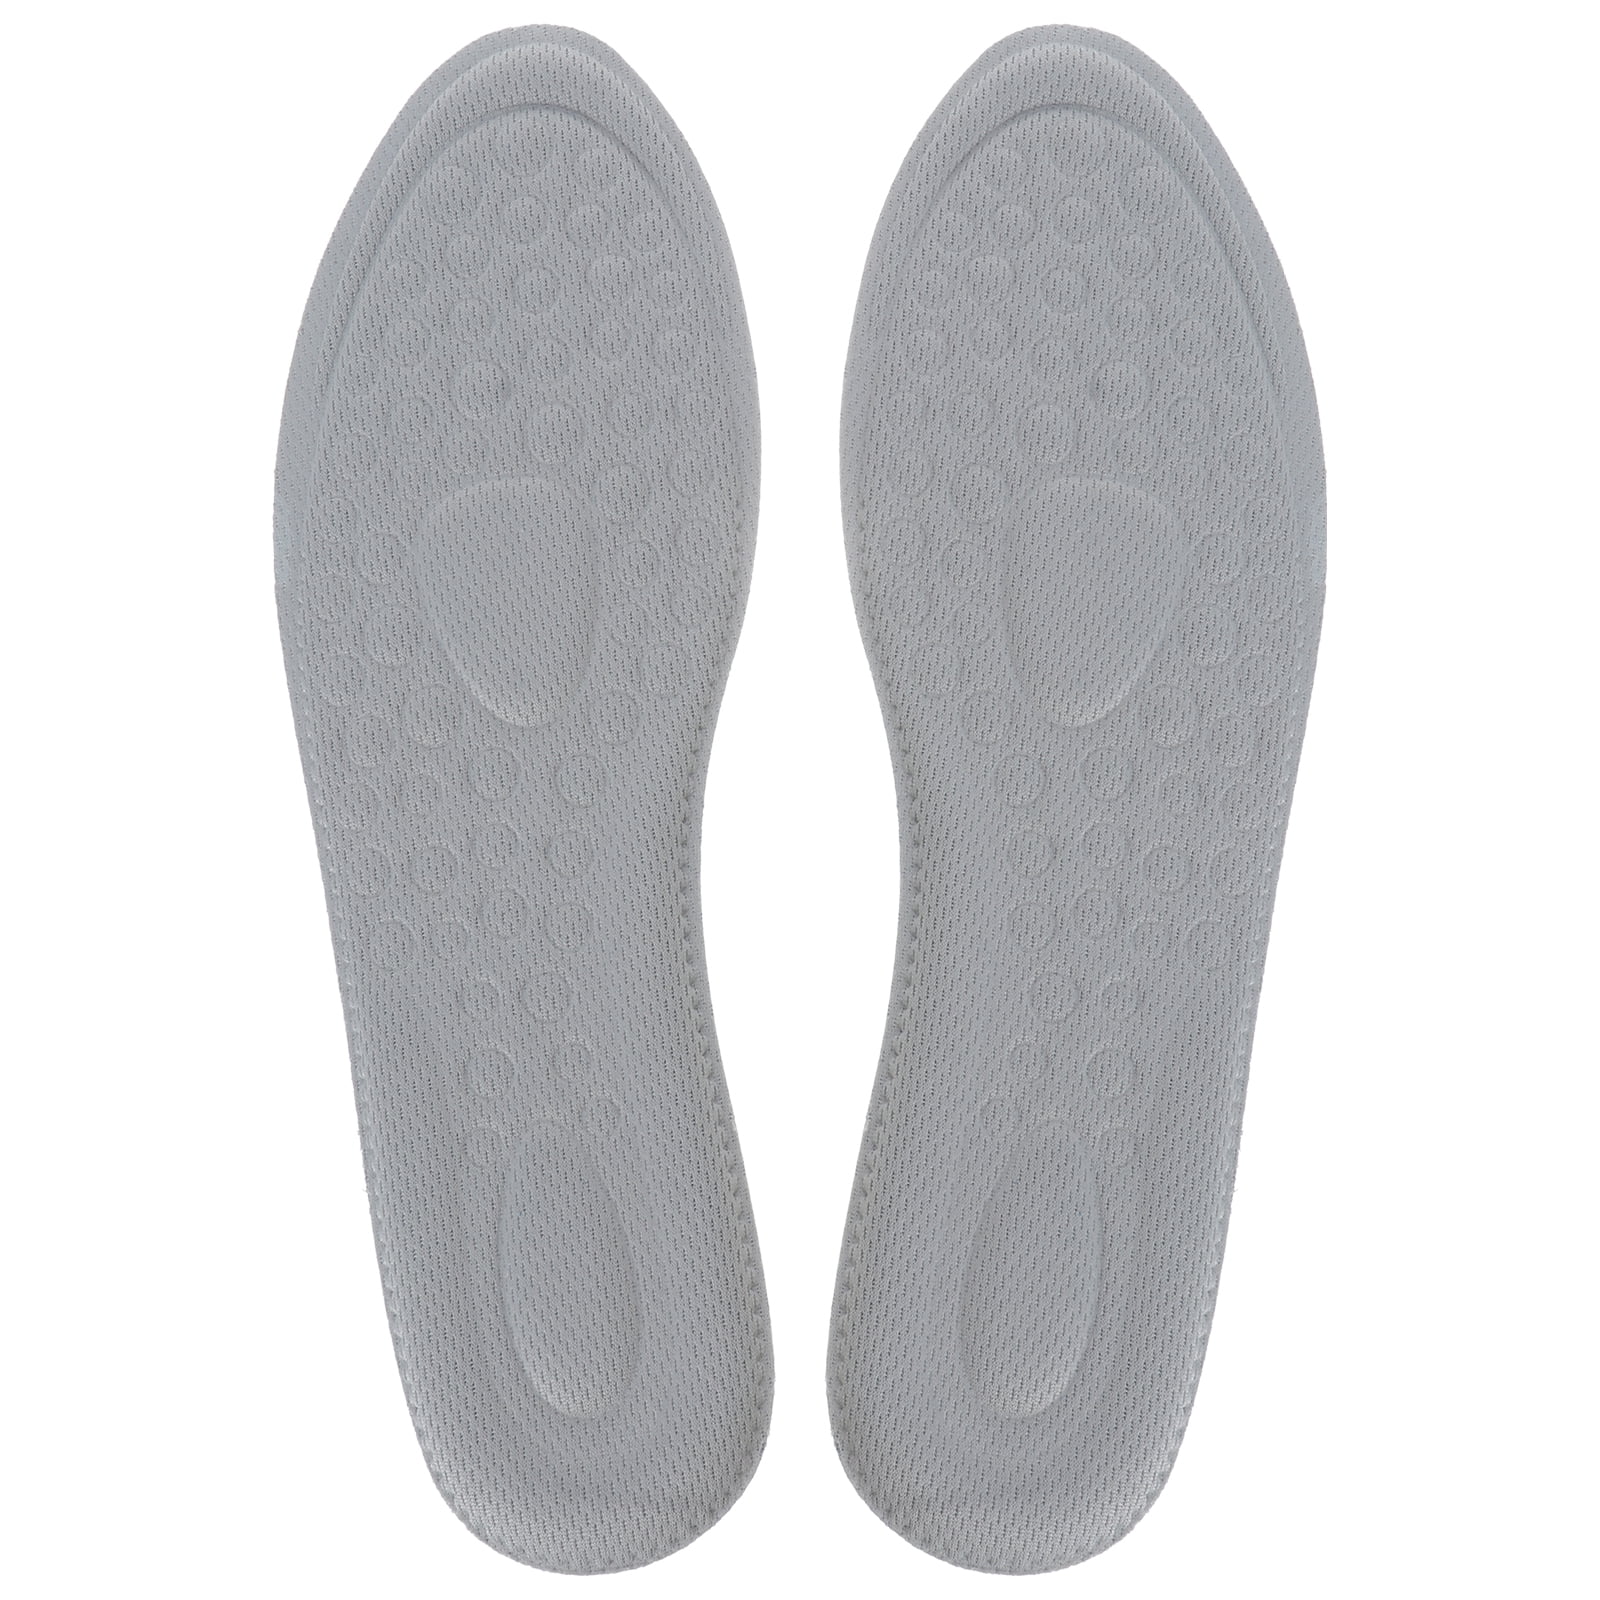 Insoles Height Shoe Increase Insole Arch Support Lift Inserts Heel ...